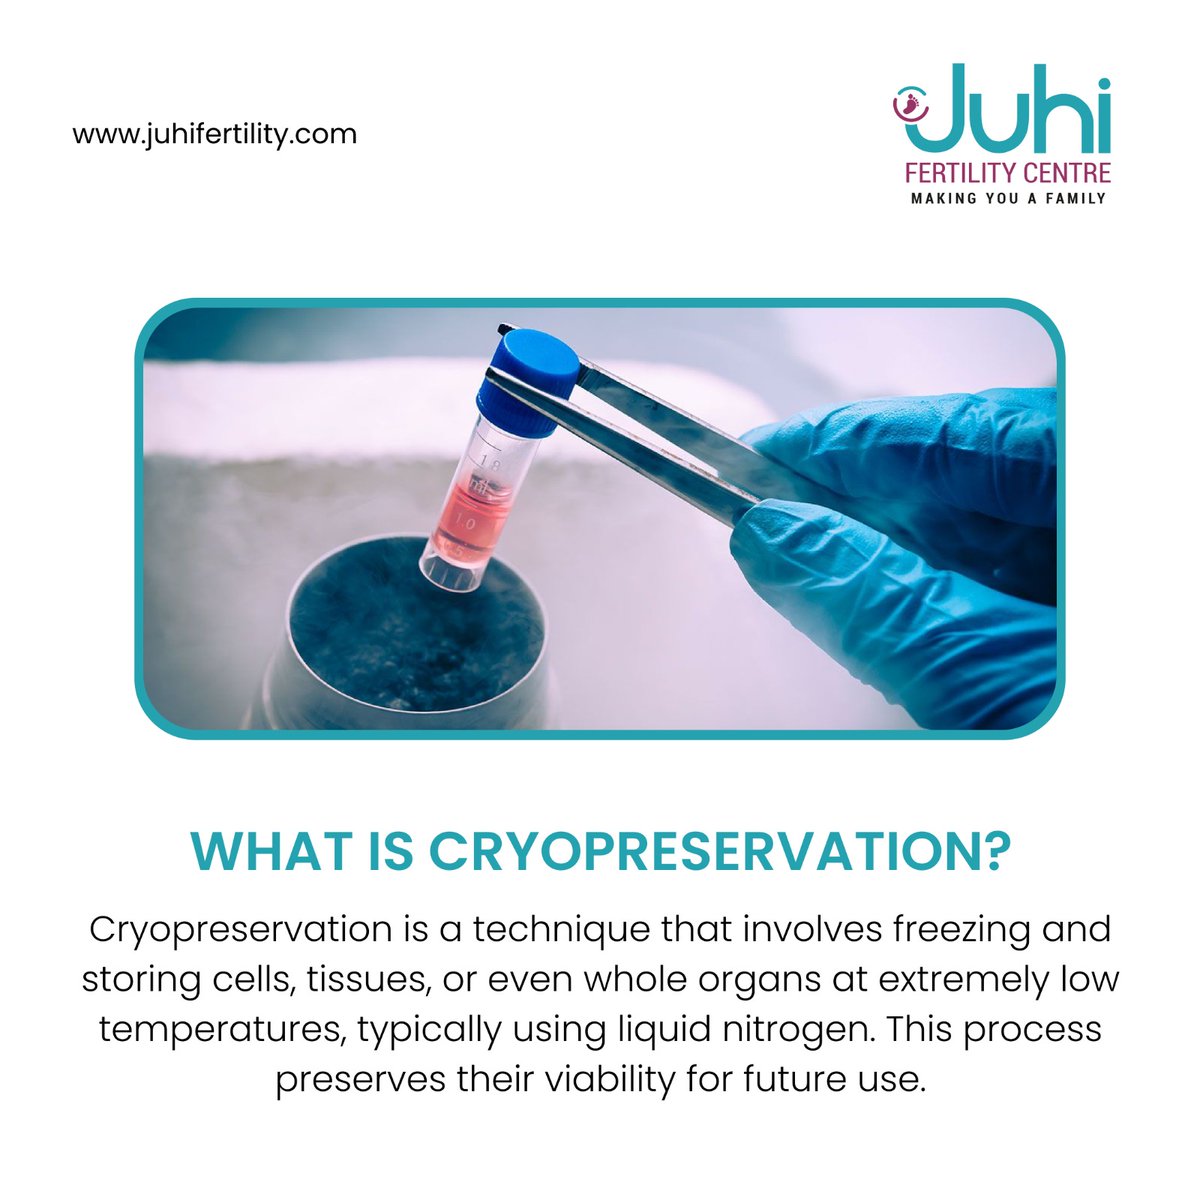 Dive into the fascinating realm of cryopreservation and witness the magic it holds. ❄️✨This remarkable technique involves freezing and storing cells, tissues, and even entire organs at ultra-low temperatures, courtesy of liquid nitrogen.
#ivfawareness #infertility